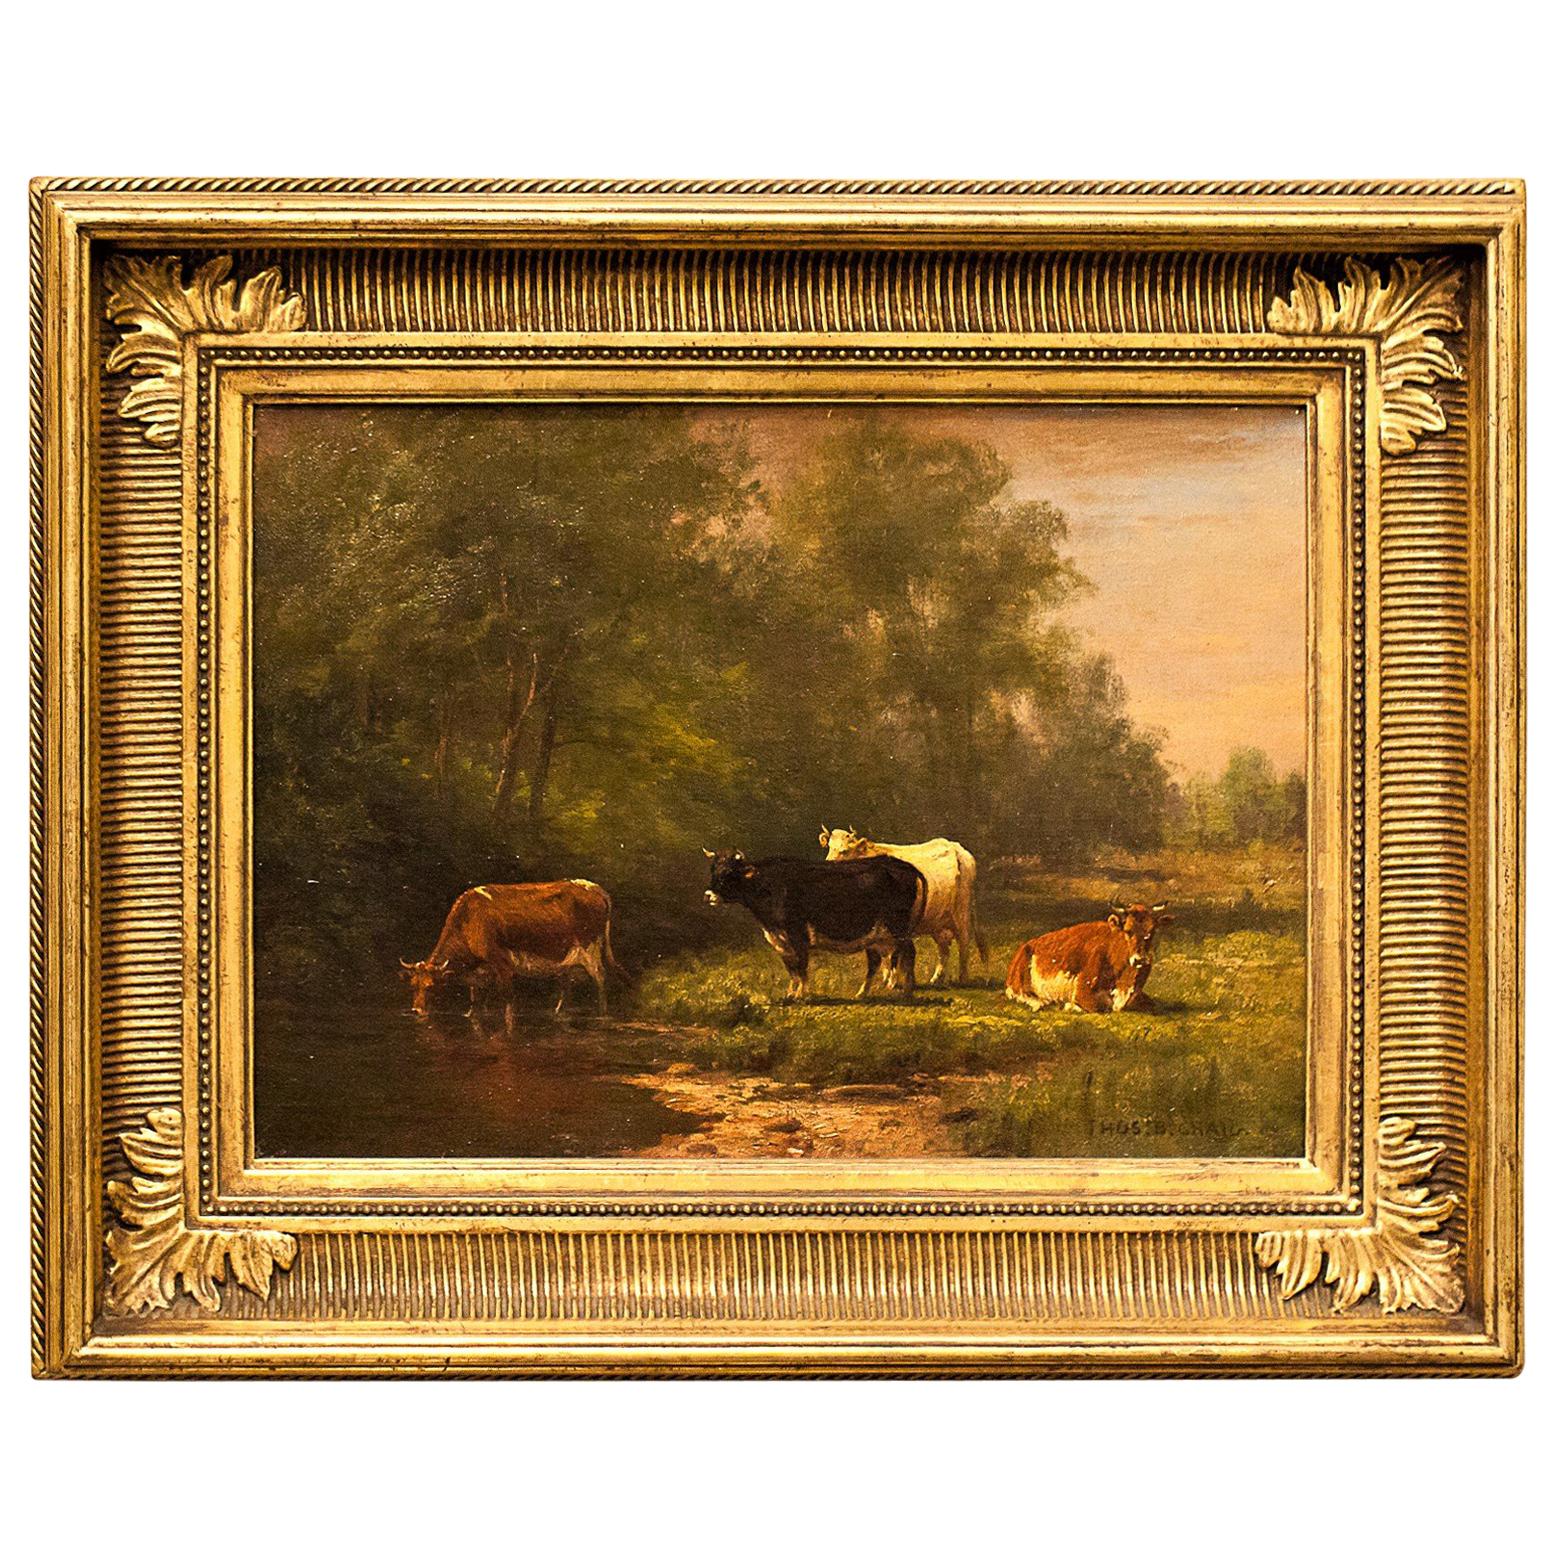 Pastoral Landscape "A Summer Afternoon" by Thomas Bigelow Craig